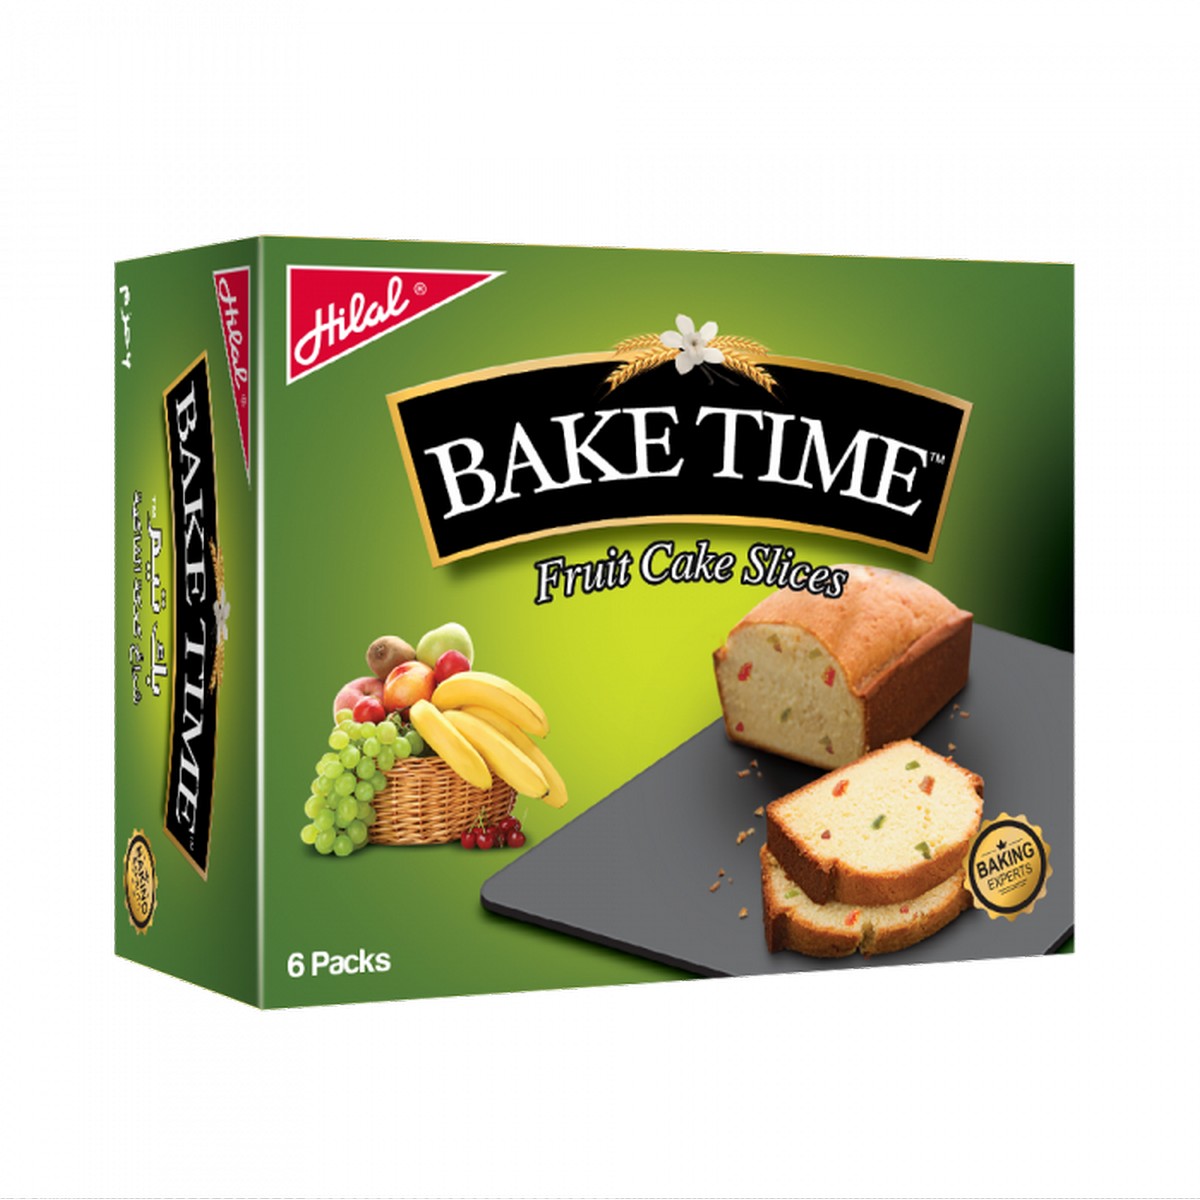 Buy Bake Time Plain Cake Box at the best price in Karachi, Lahore and  Islamabad | METRO Online} content={Buy Bake Time Plain Cake Box in bake time  plain cake box from 229